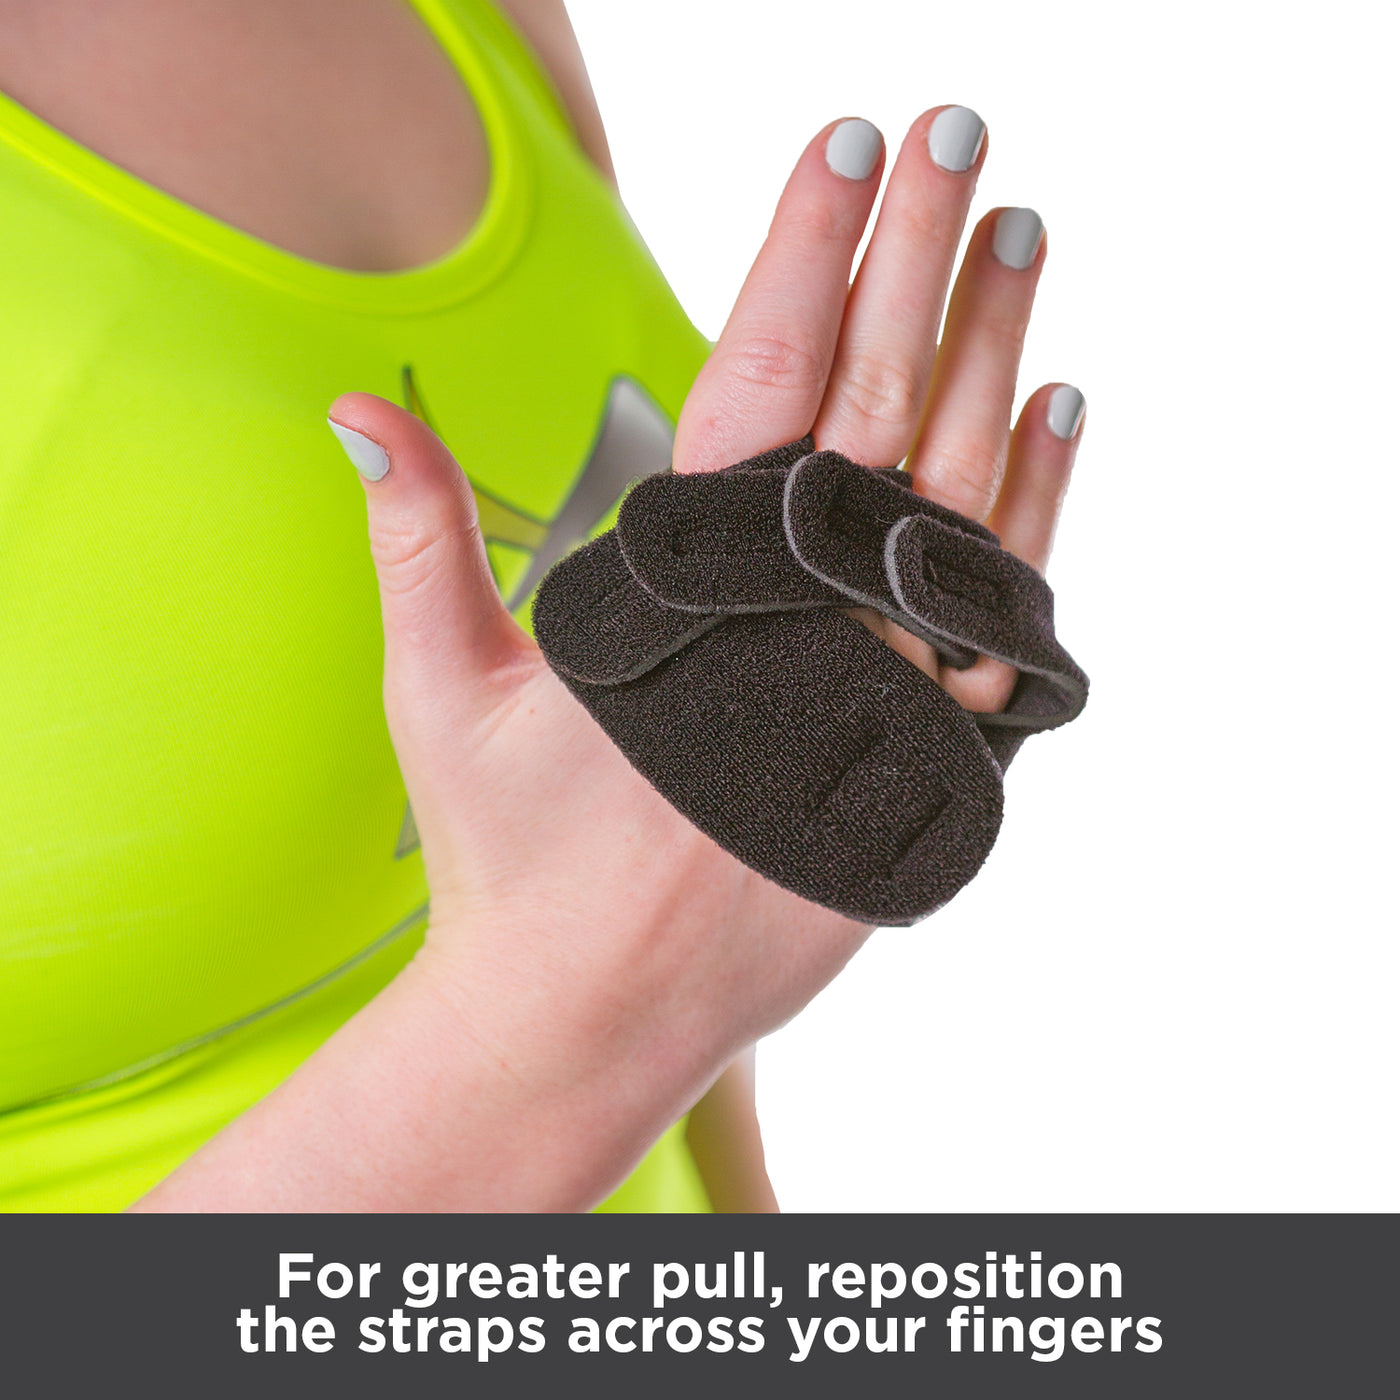 For great pull and ulnar deviation correction, reposition the straps across your fingers